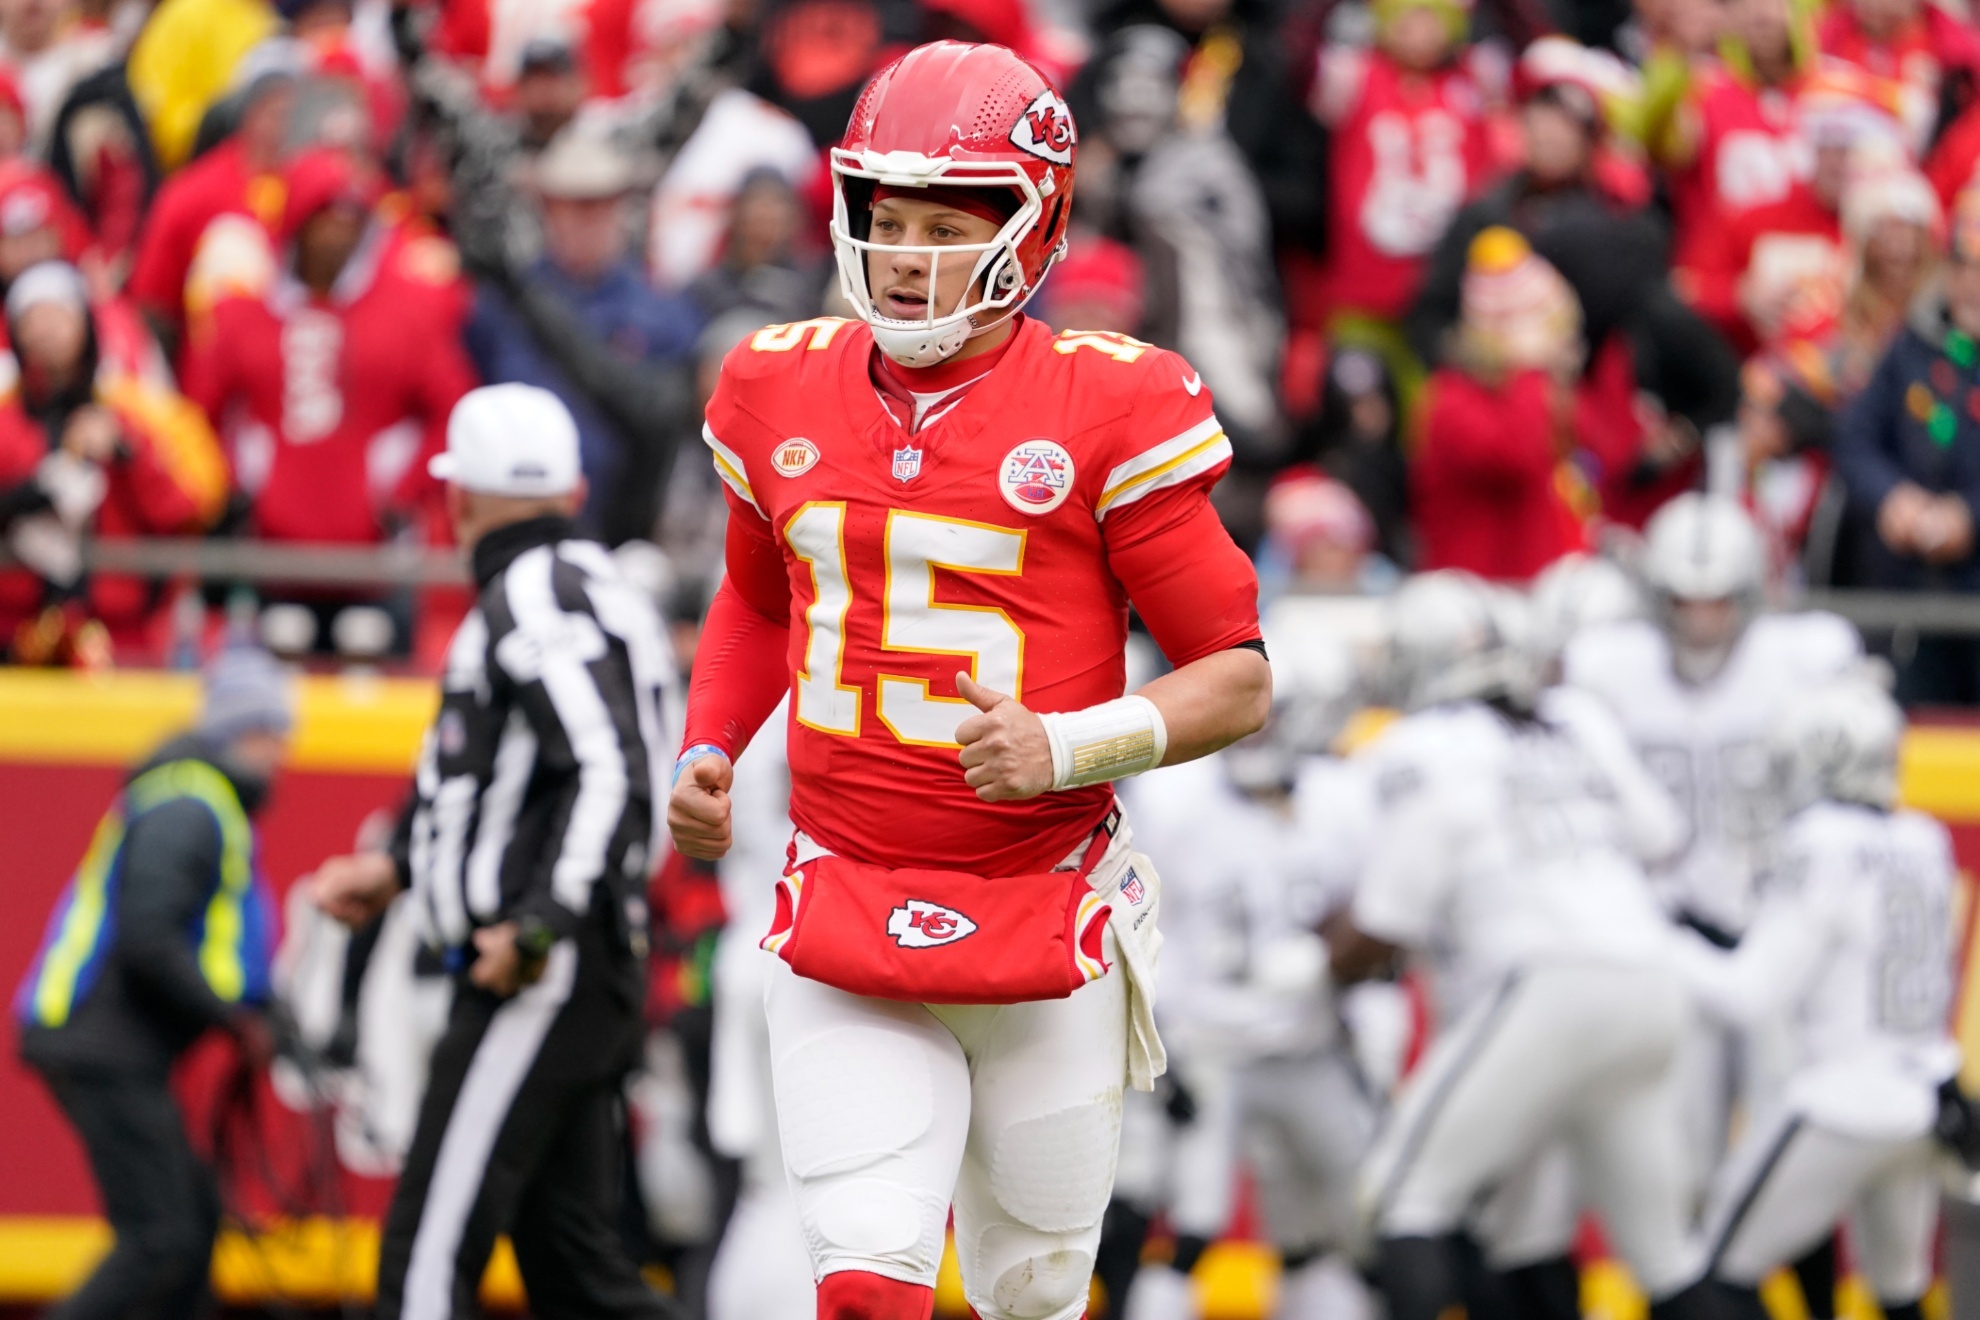 Patrick Mahomes and the Chiefs could clinch the AFC West this weekend.